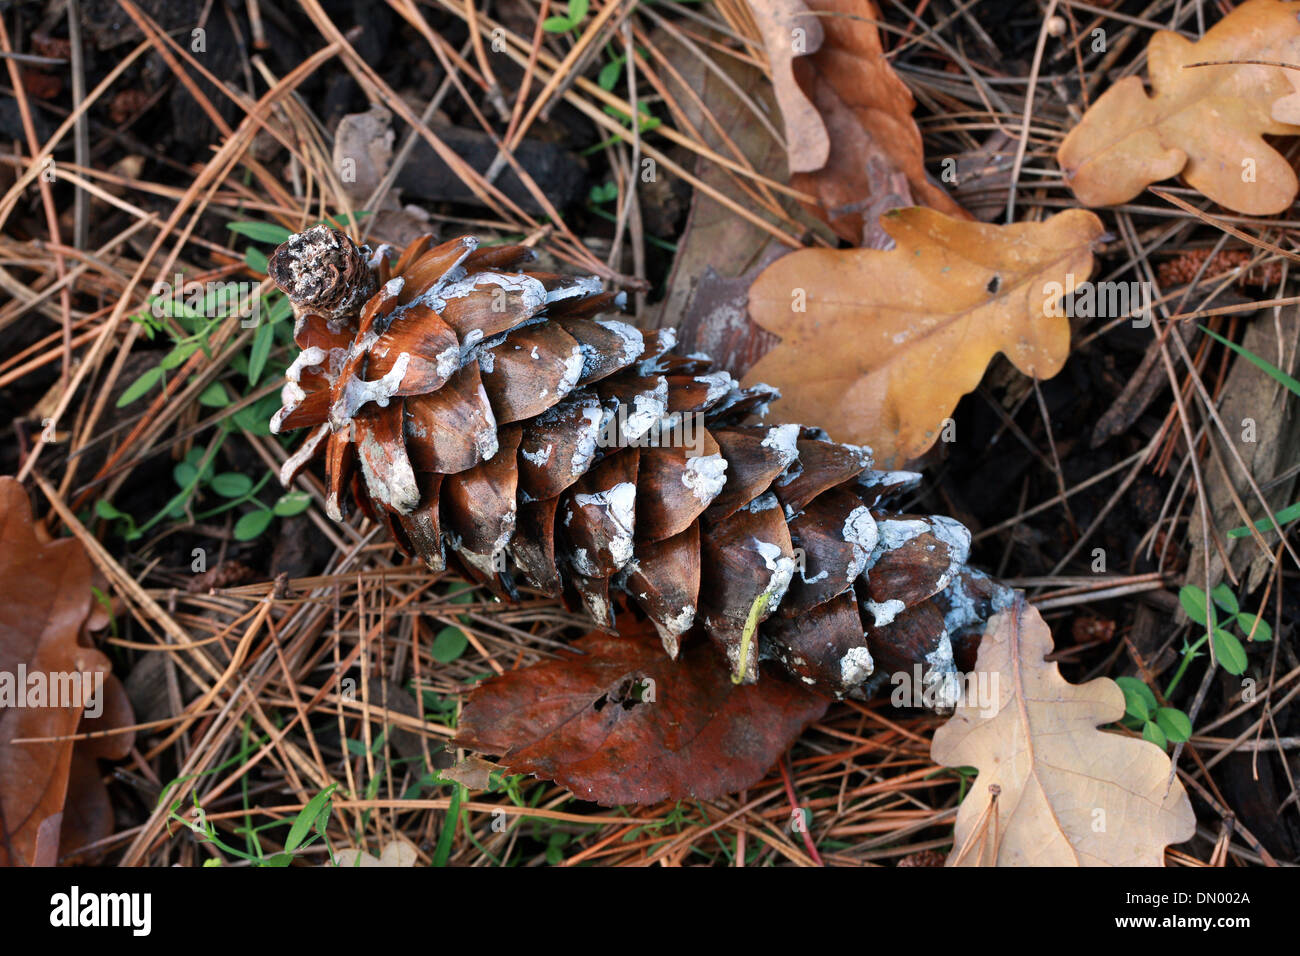 Mexican White Pine Cone, Pinus ayacahuite, Pinaceae, Mexico. Stock Photo